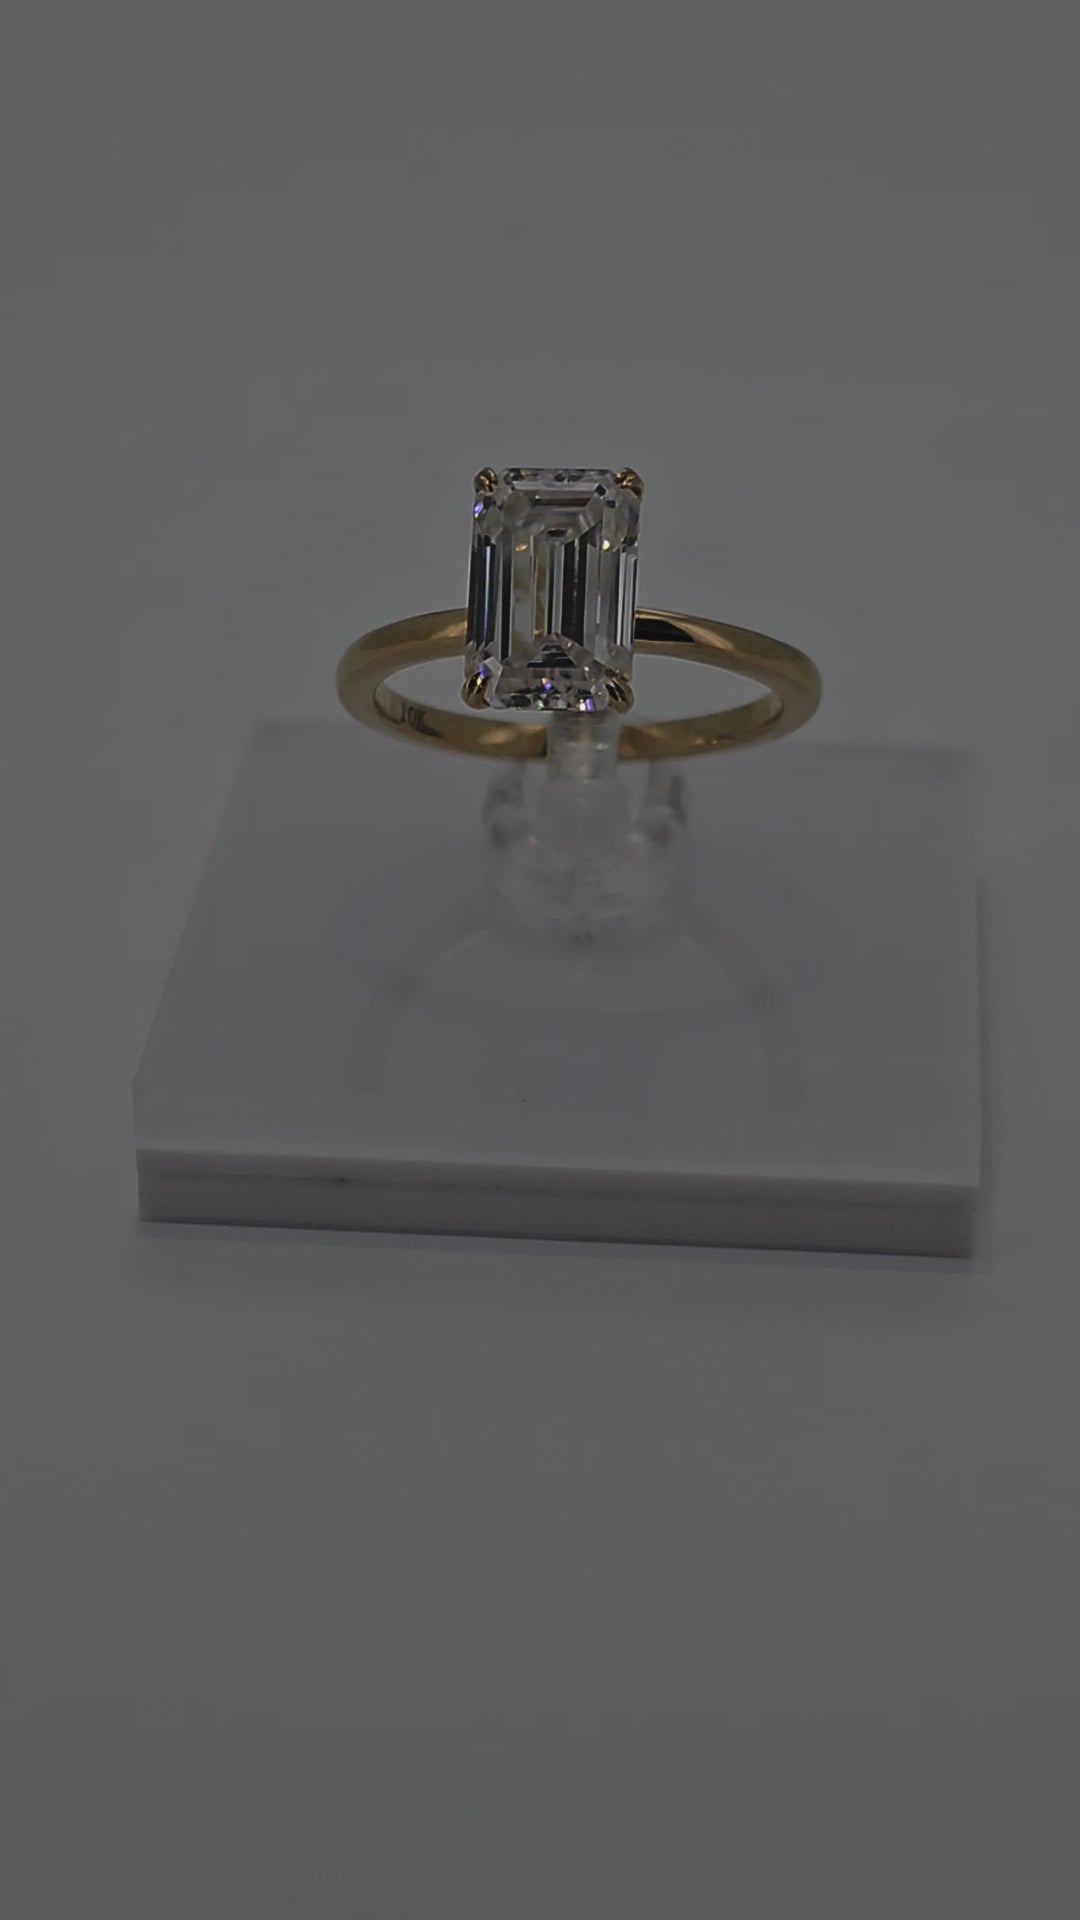 Video of Lavish 4 Carat Solid Gold Emerald Cut Diamond Solitaire Ring from Boujee Ice